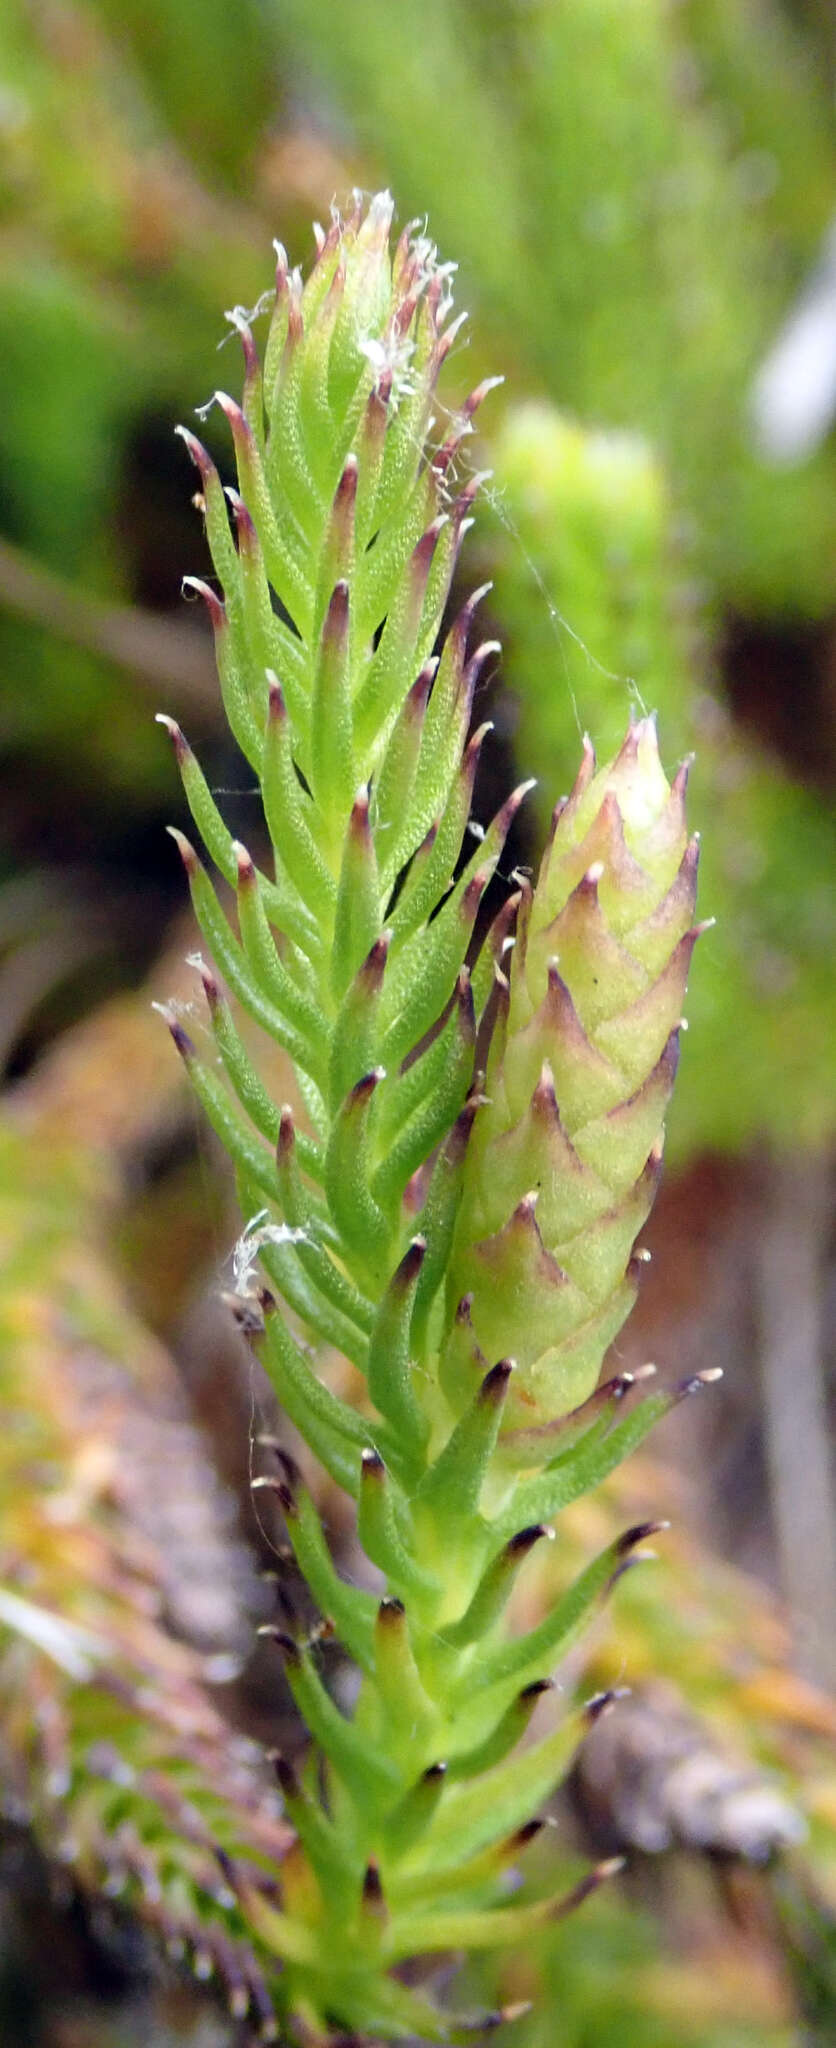 Image of Lateristachys lateralis (R. Br.) Holub